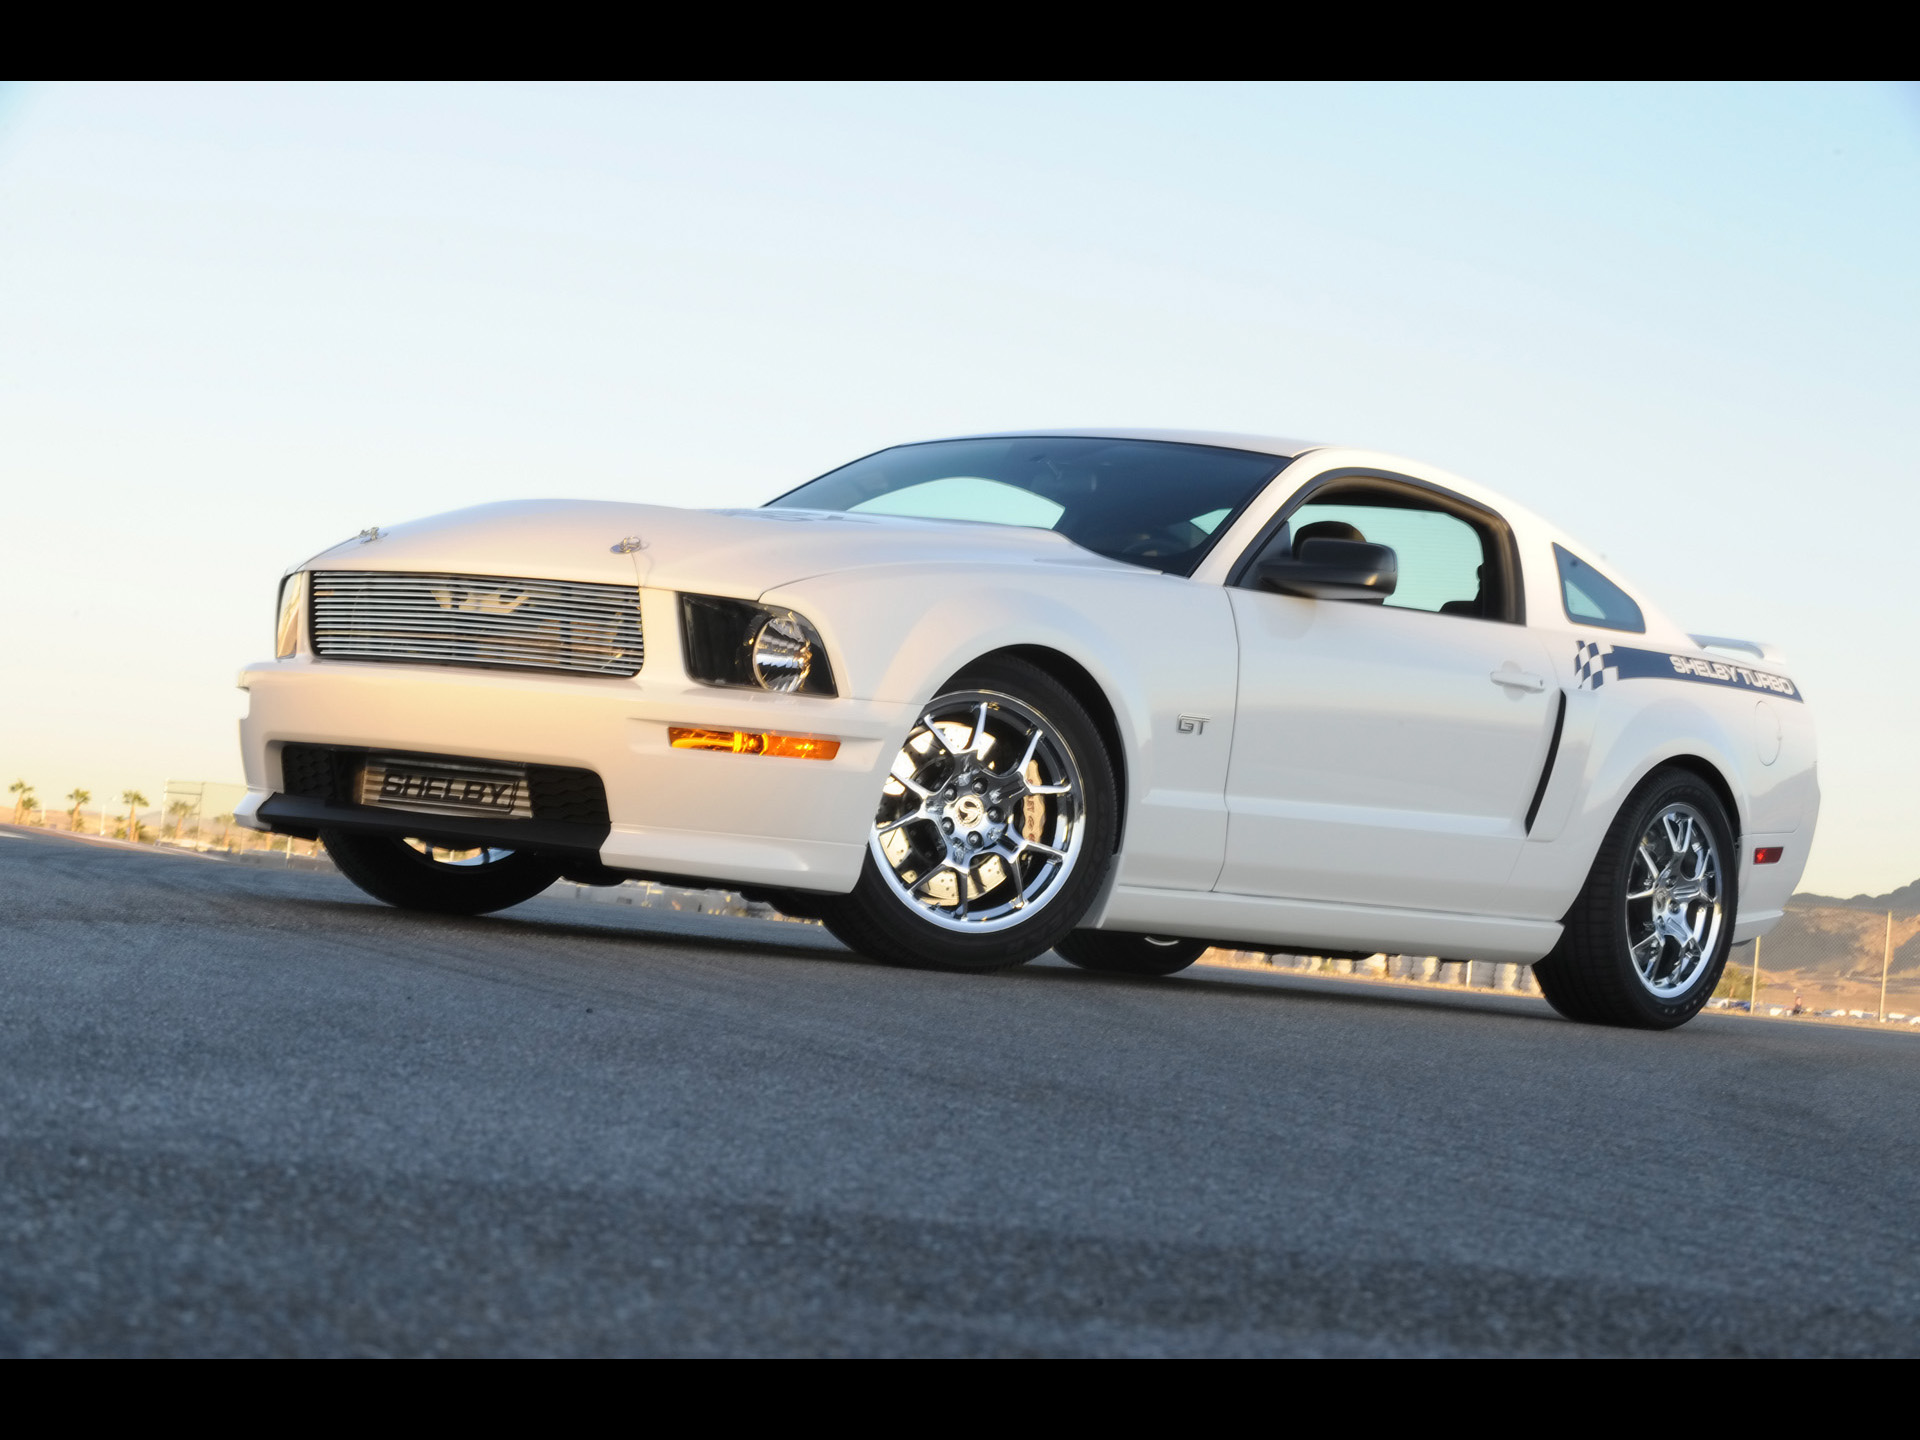 2009, Ford, Mustang, G t, Shelby, Turbo, Muscle Wallpaper